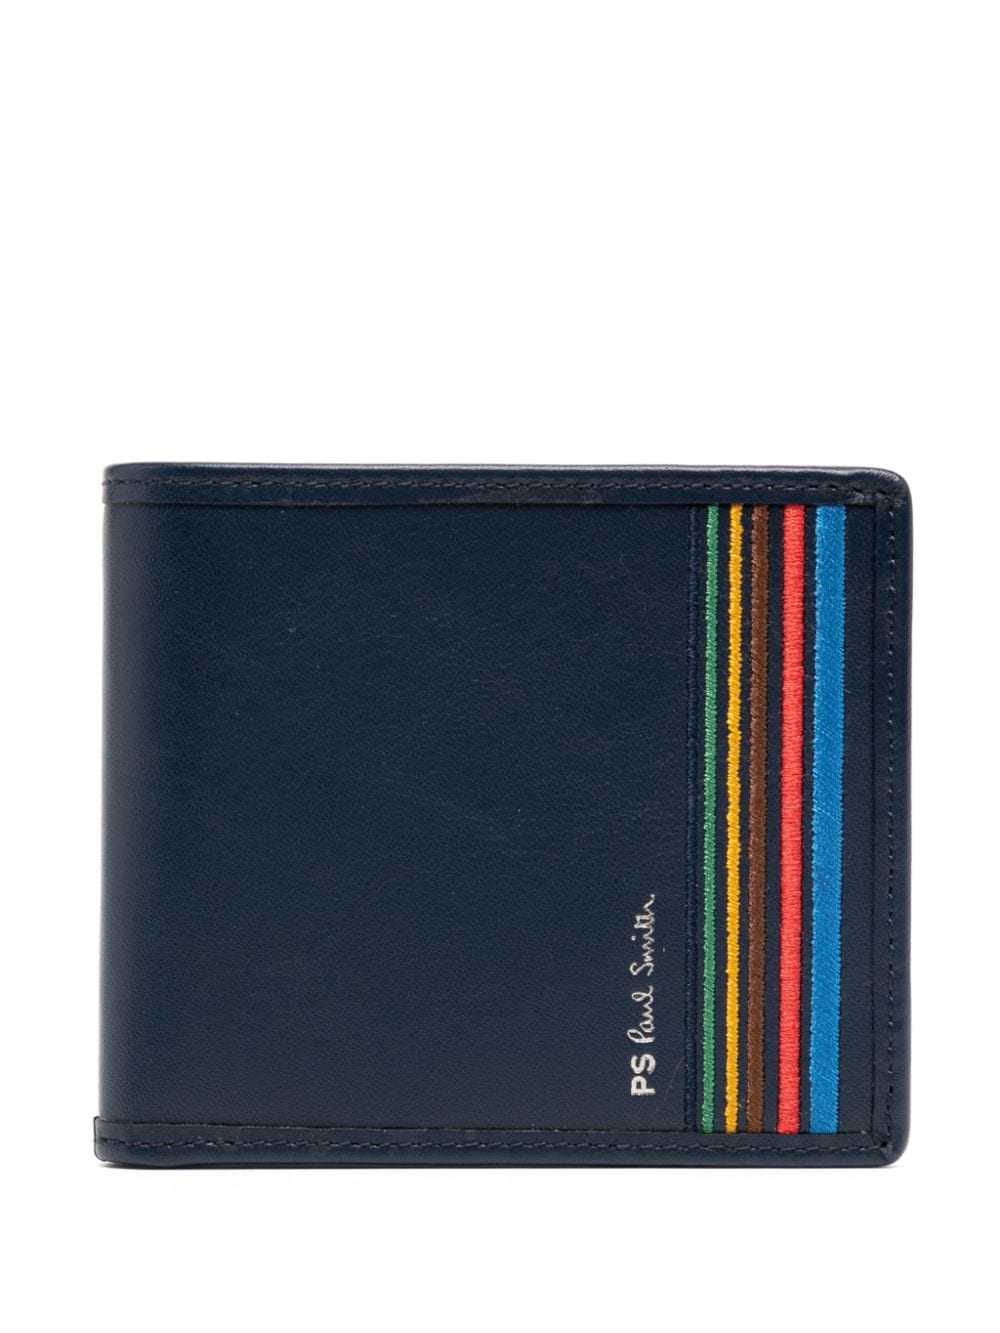 PS Paul Smith stripe-embroidered bi-fold leather wallet - Blue von PS Paul Smith